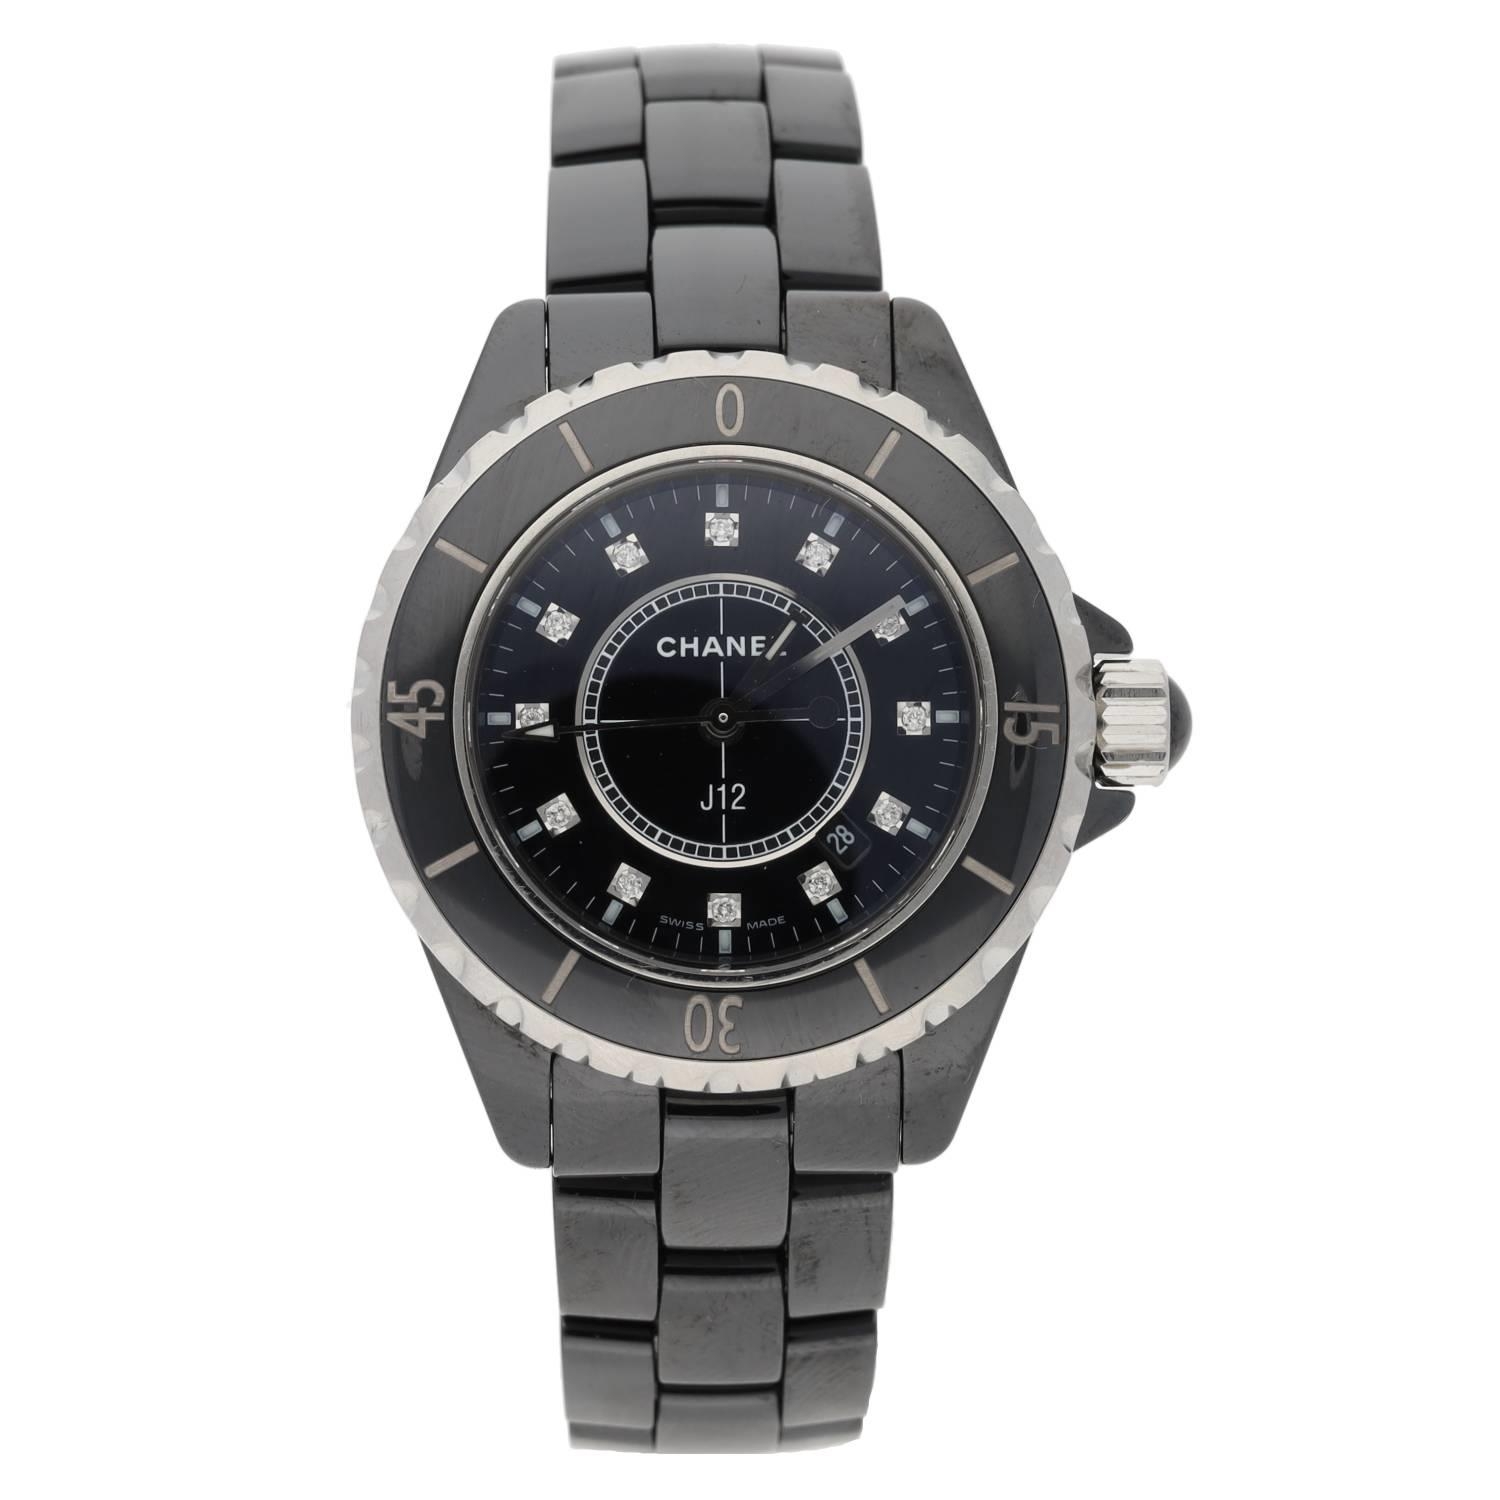 Chanel J12 black ceramic and stainless steel lady's wristwatch, reference no. H1625, serial no. I.